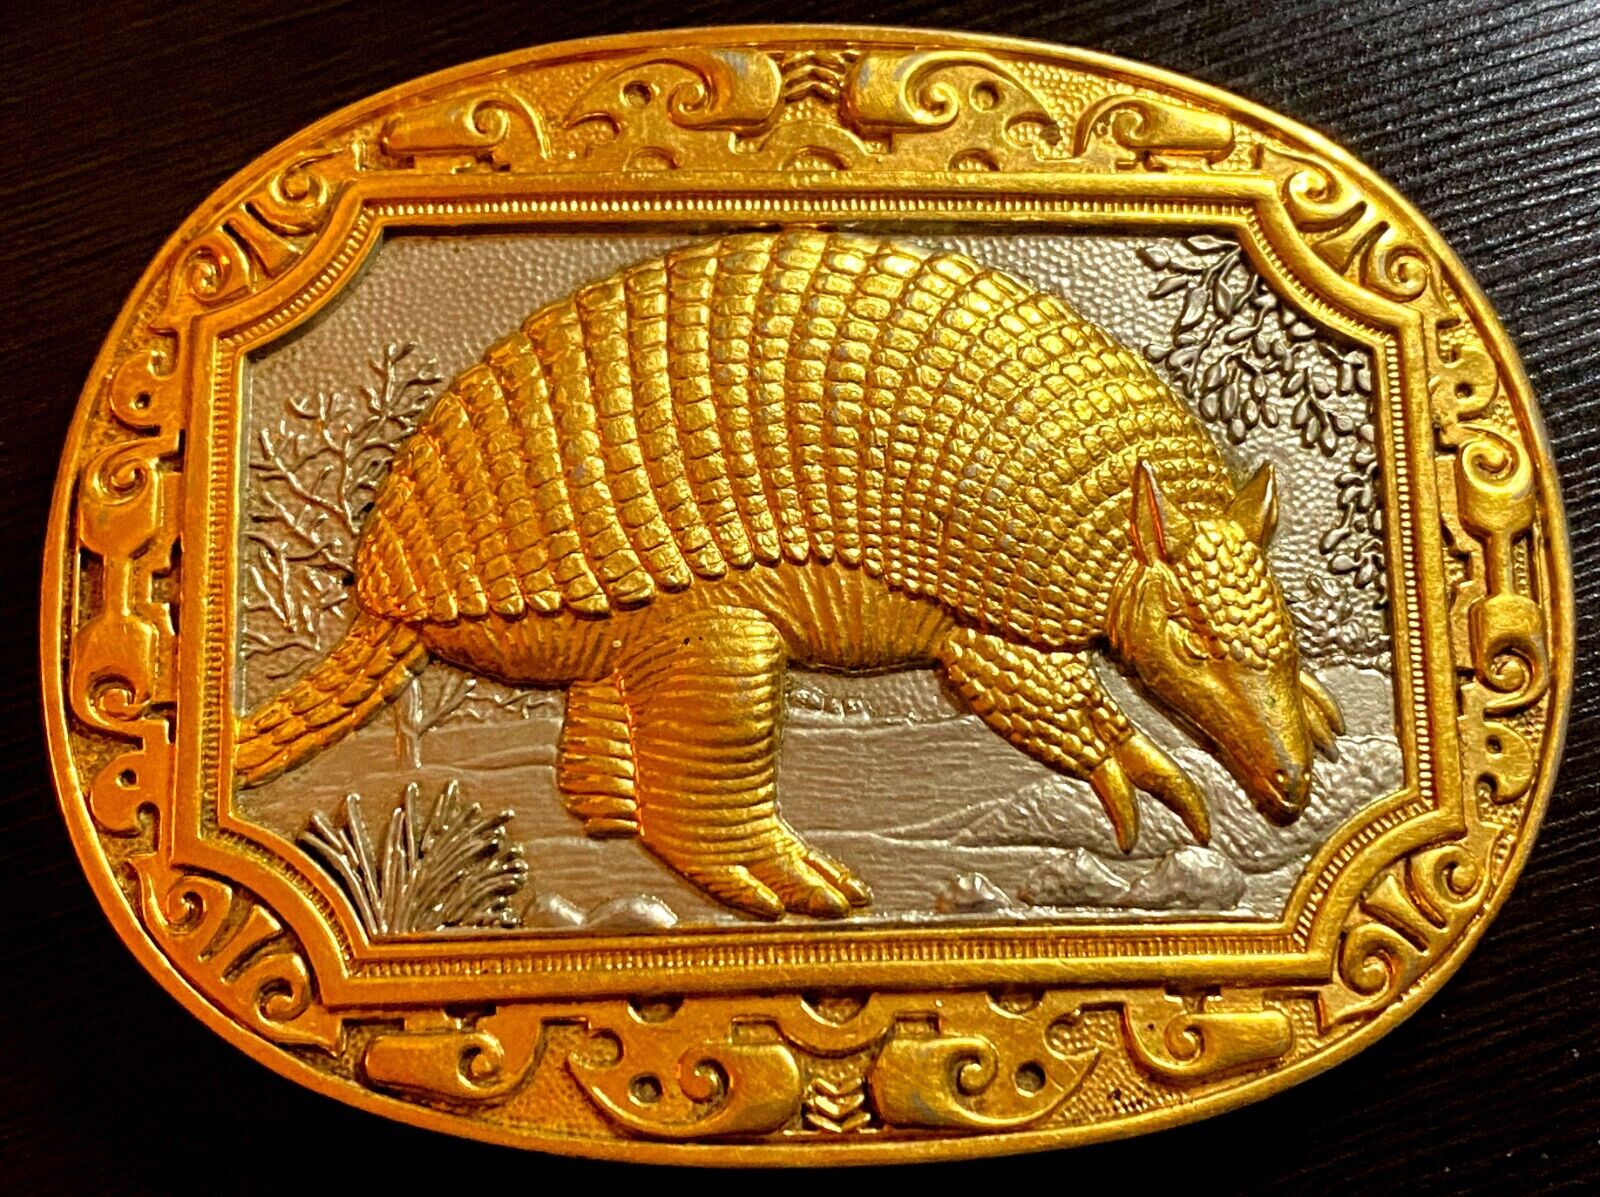 Vintage and Pristine 24K Gold-Plated Armadillo Belt Buckle